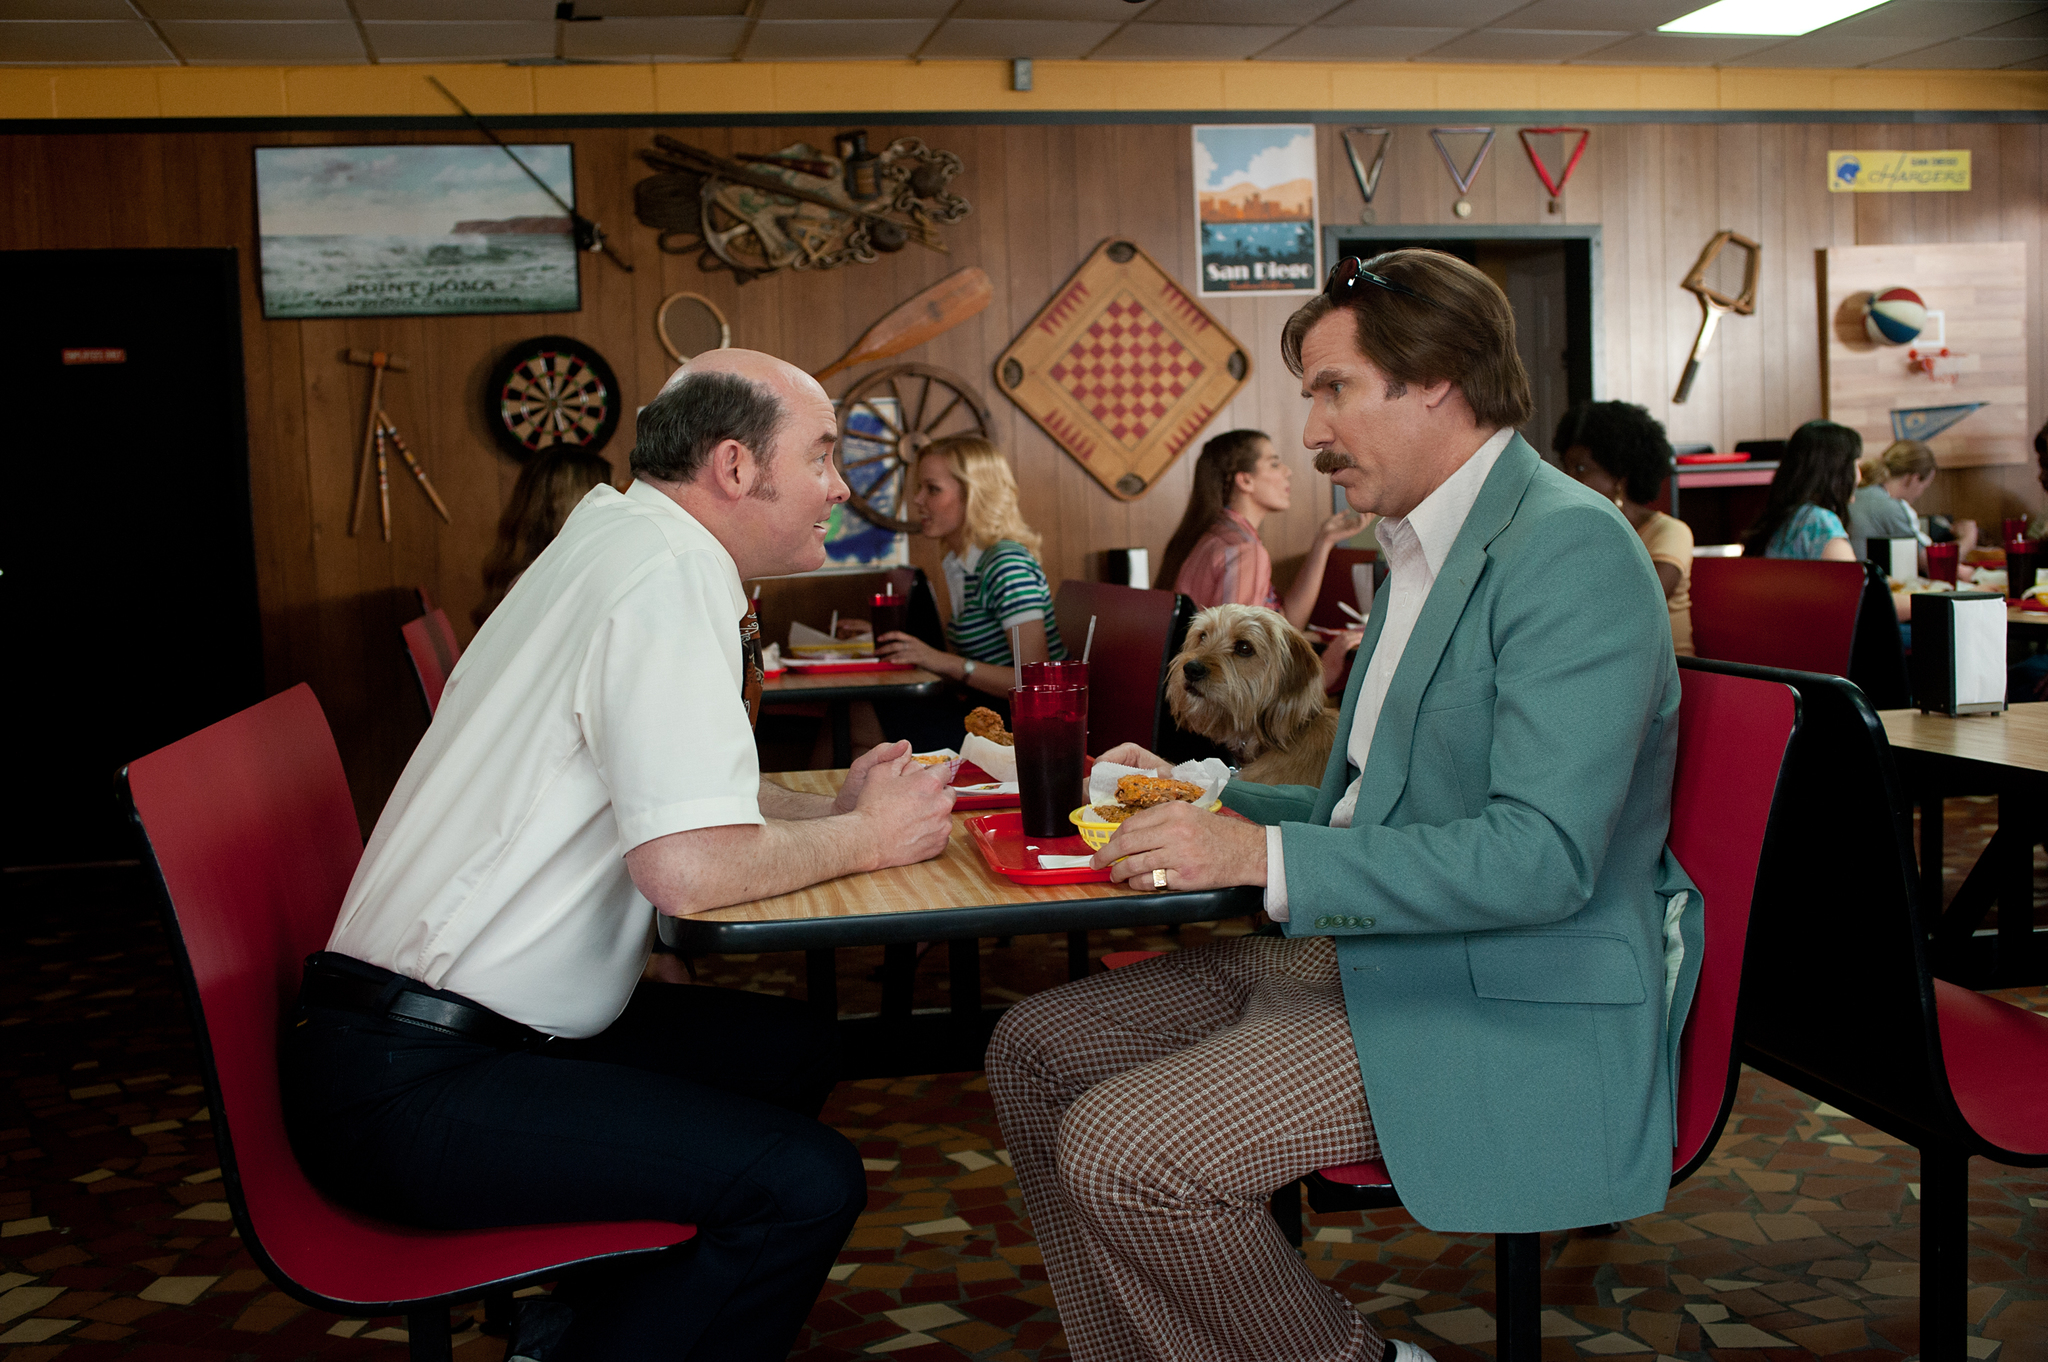 Still of Will Ferrell and David Koechner in Anchorman 2: The Legend Continues (2013)